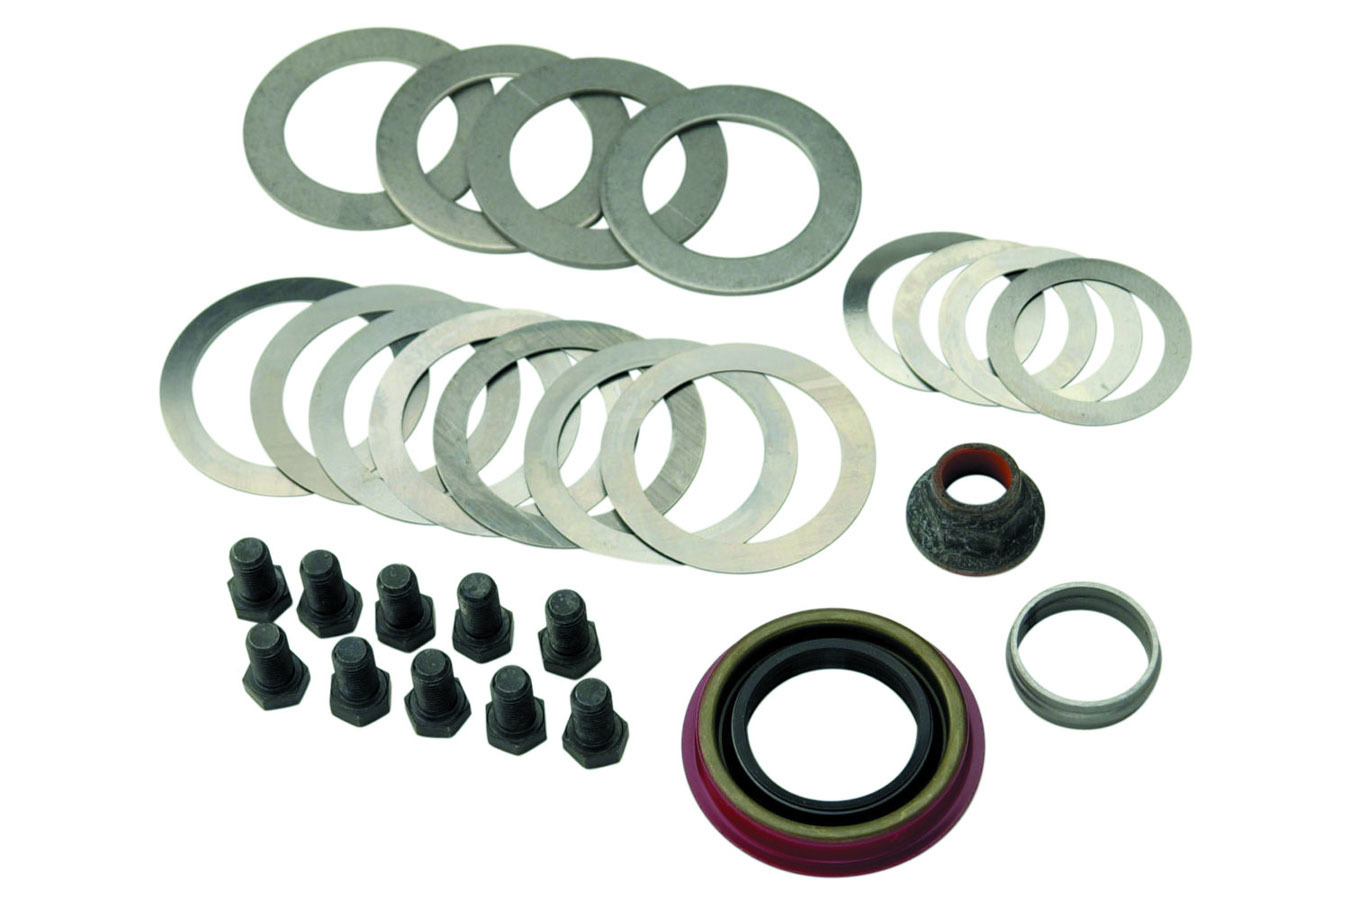 FORD Differential Installation Kit, Crush Sleeve/Hardware/Seals/Shims, Ford 8.8 in, Kit